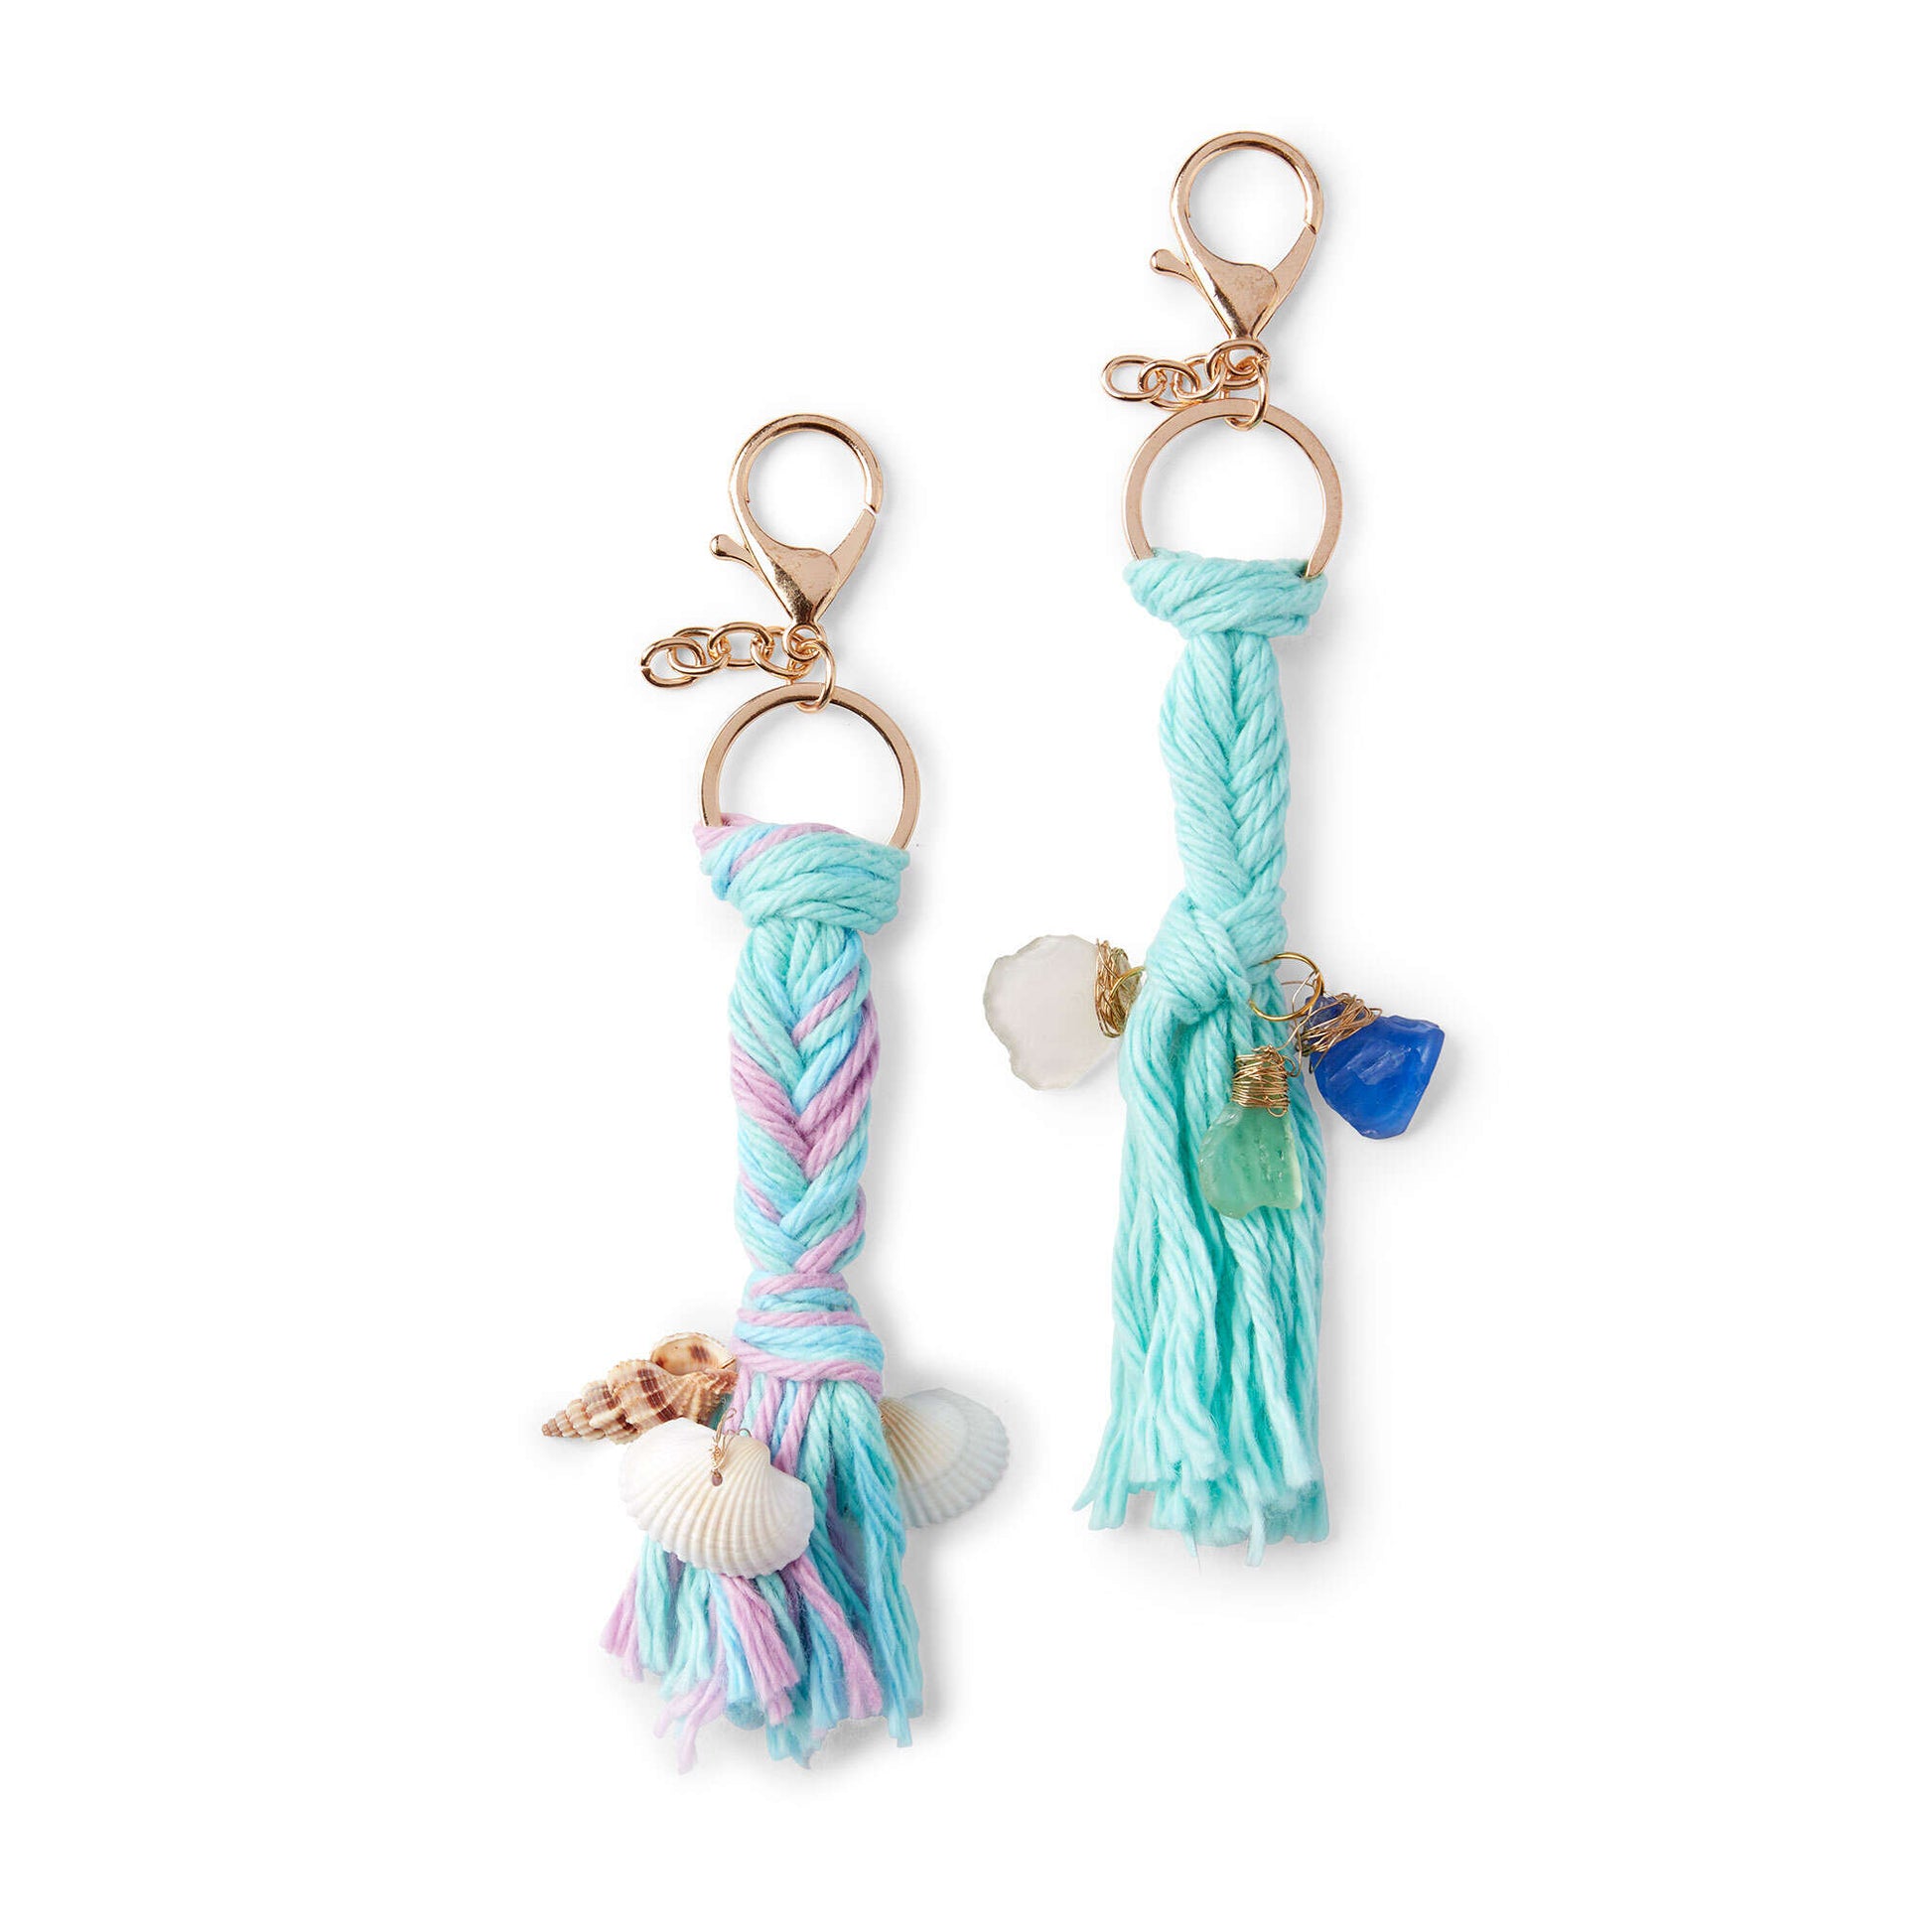 Free Red Heart Craft Mermaid Tails Keychains Pattern